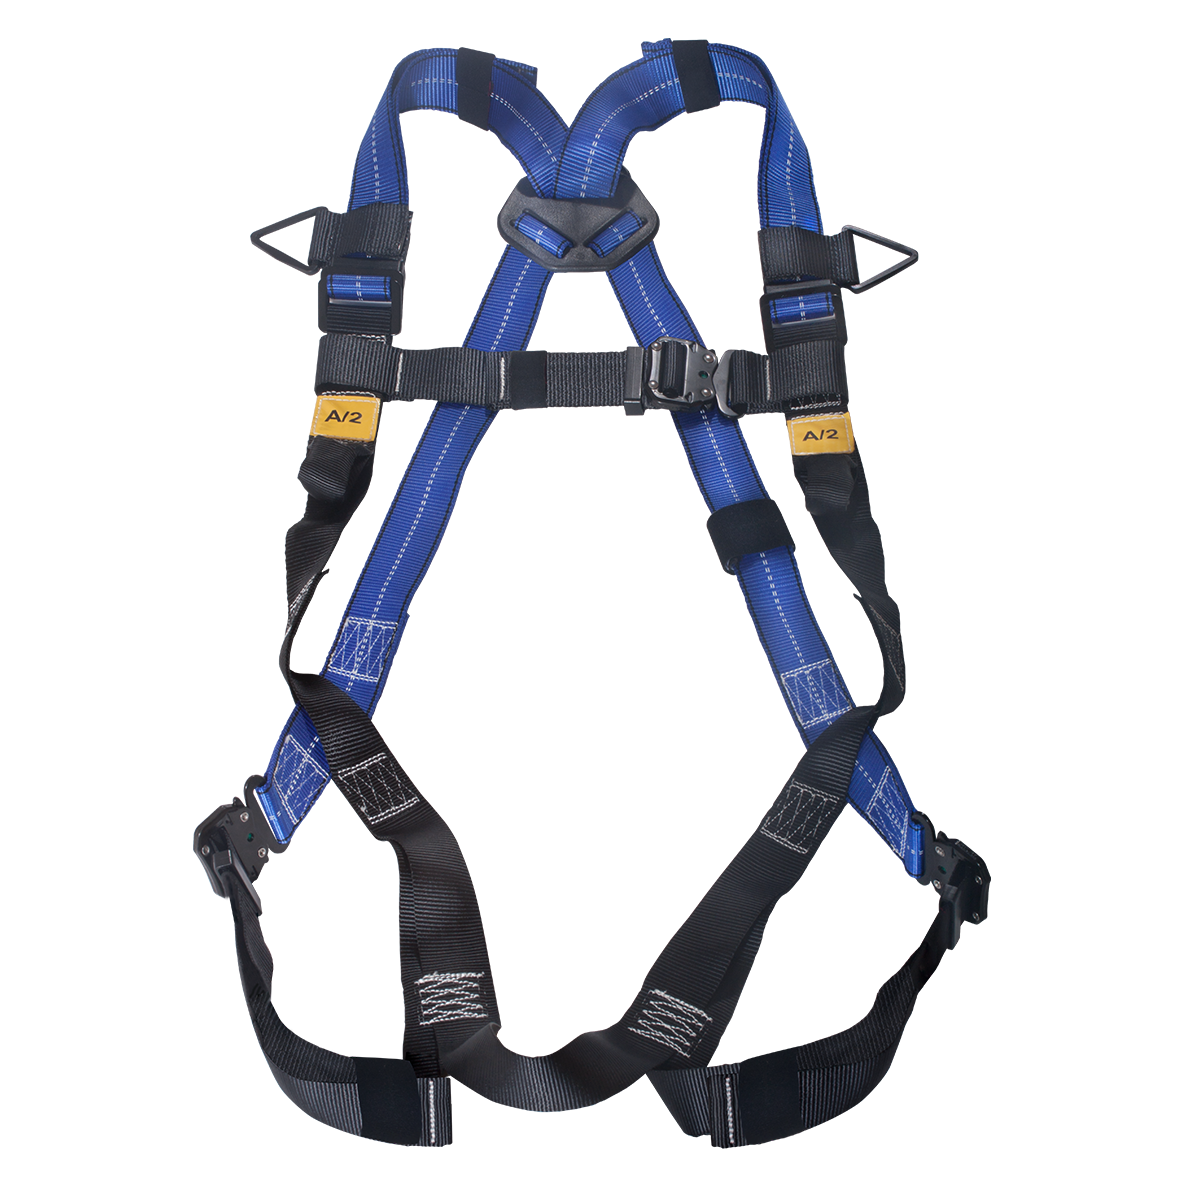 WORKSafe® WSF160 FULL BODY HARNESS WITH FRONT AND DORSAL ANCHORAGE